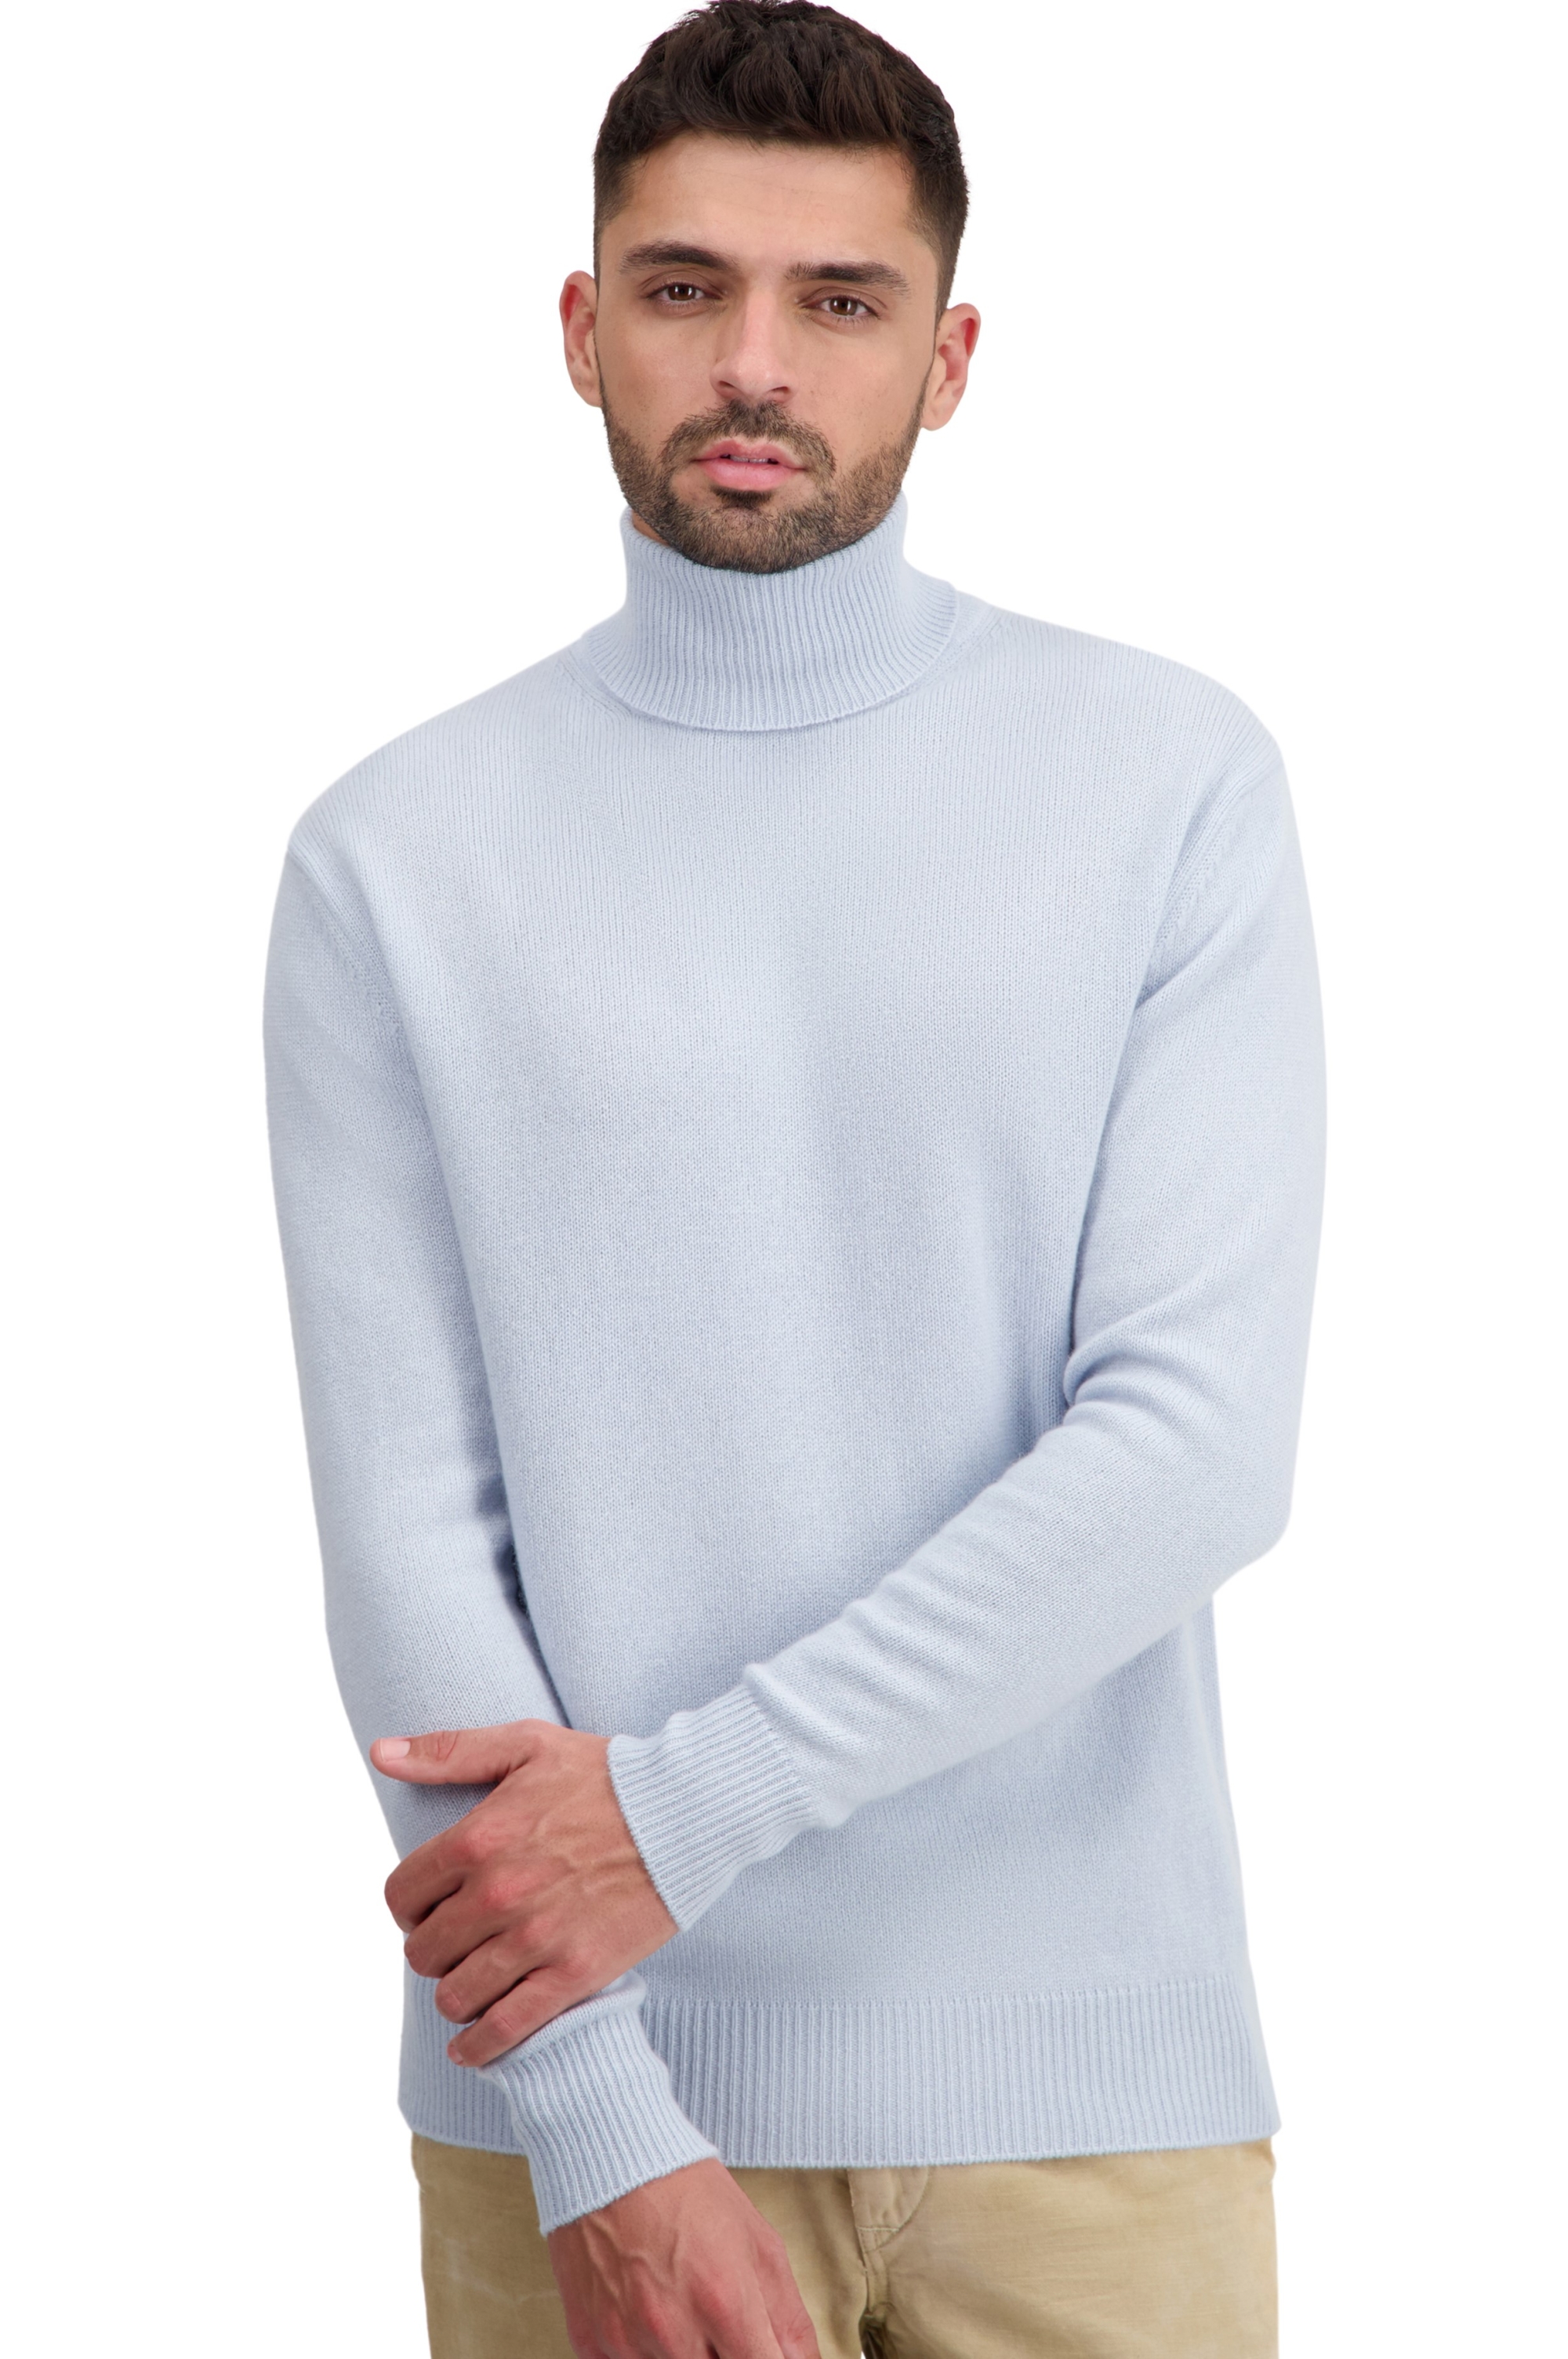 Cashmere men basic sweaters at low prices torino first whisper 3xl